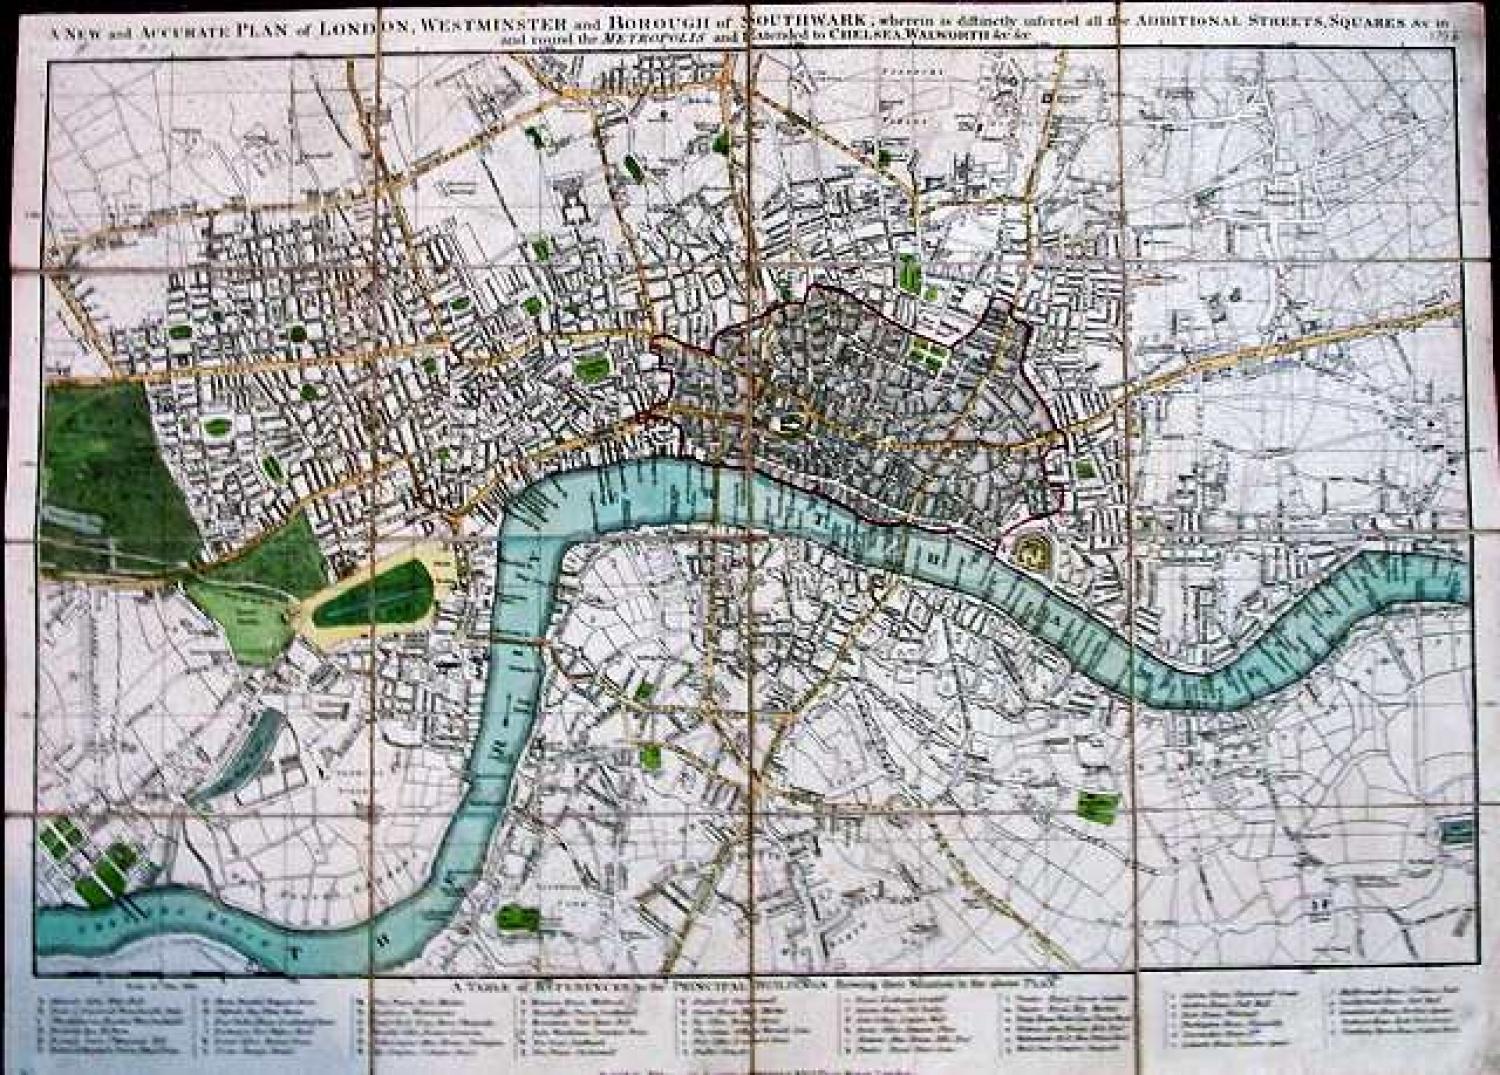 SOLD A New and accurate Plan of London, Westminster and Borough of Southwark ...